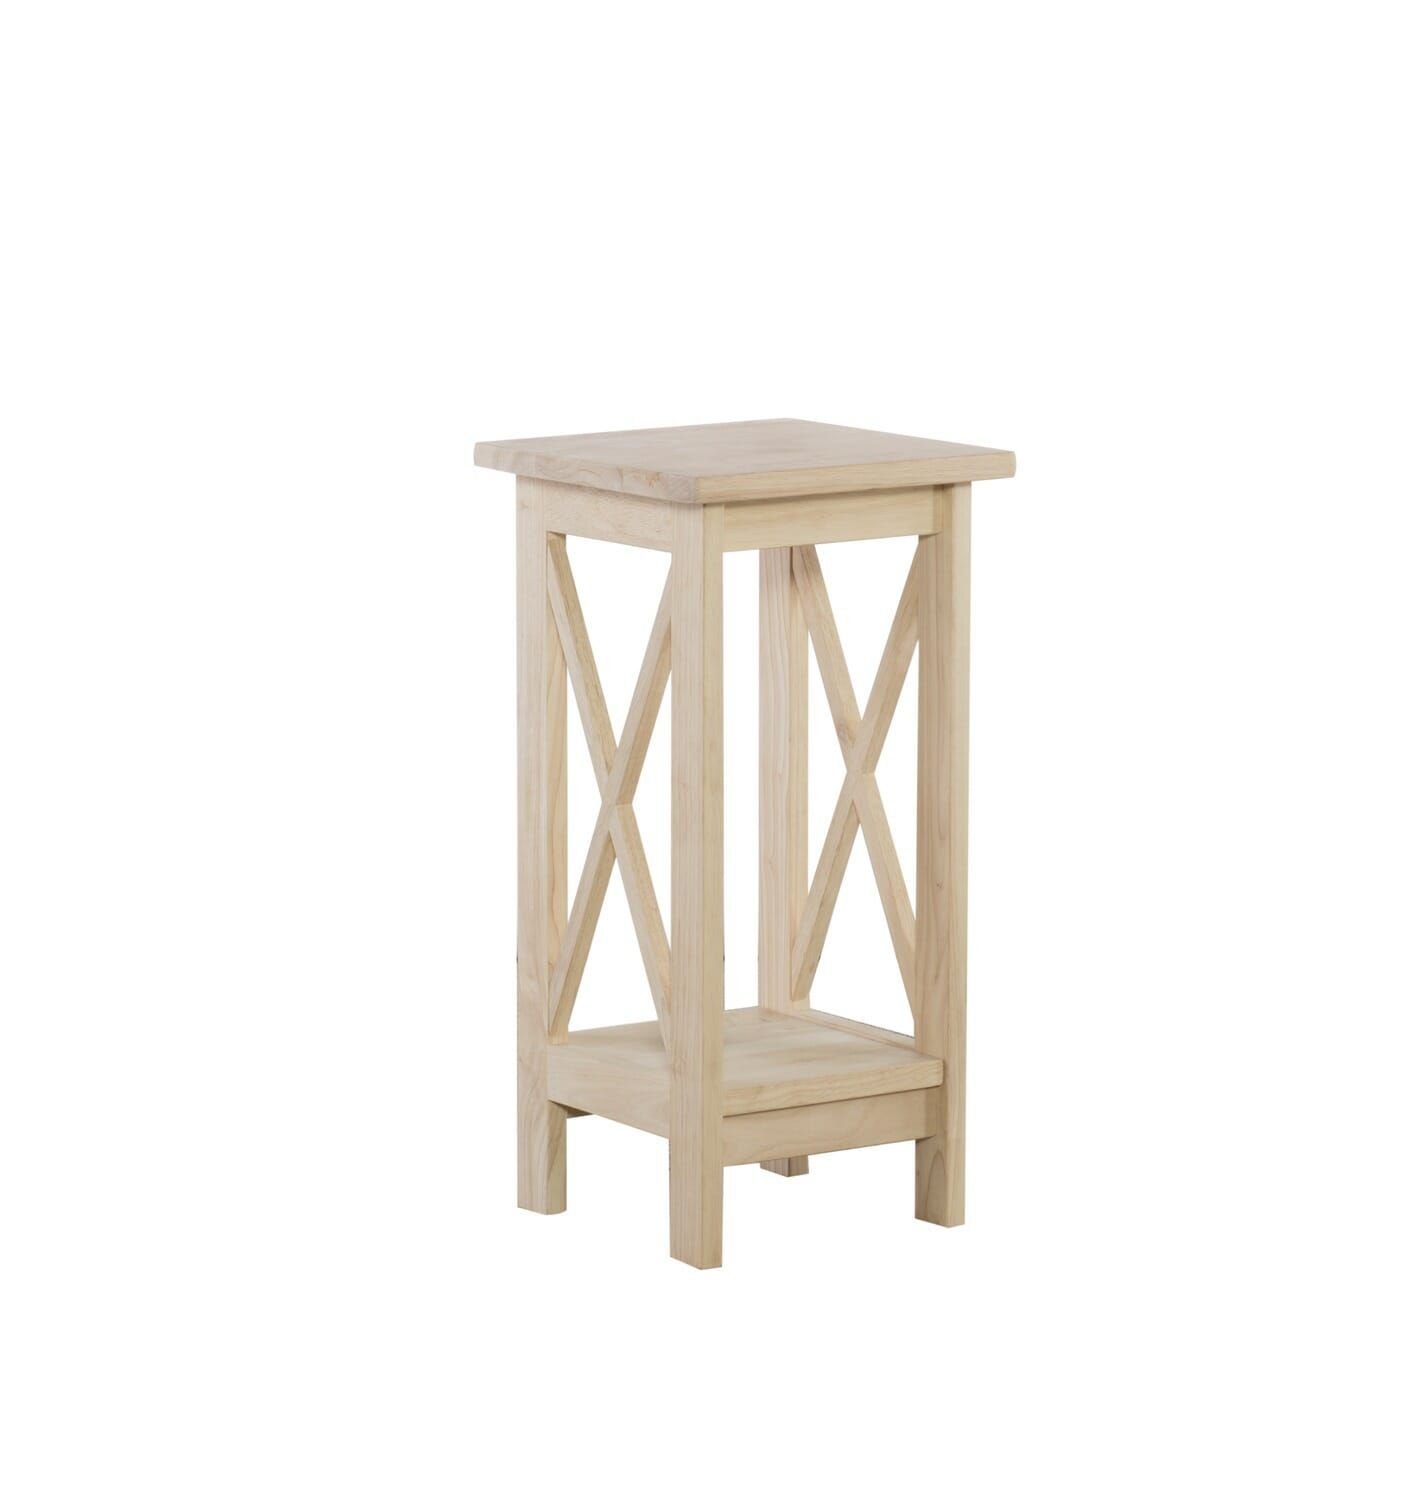 3071x 24 Inch Tall X Sided Plant Stand | Unfinished Furniture Of Wilmington Intended For Unfinished Plant Stands (Photo 1 of 15)